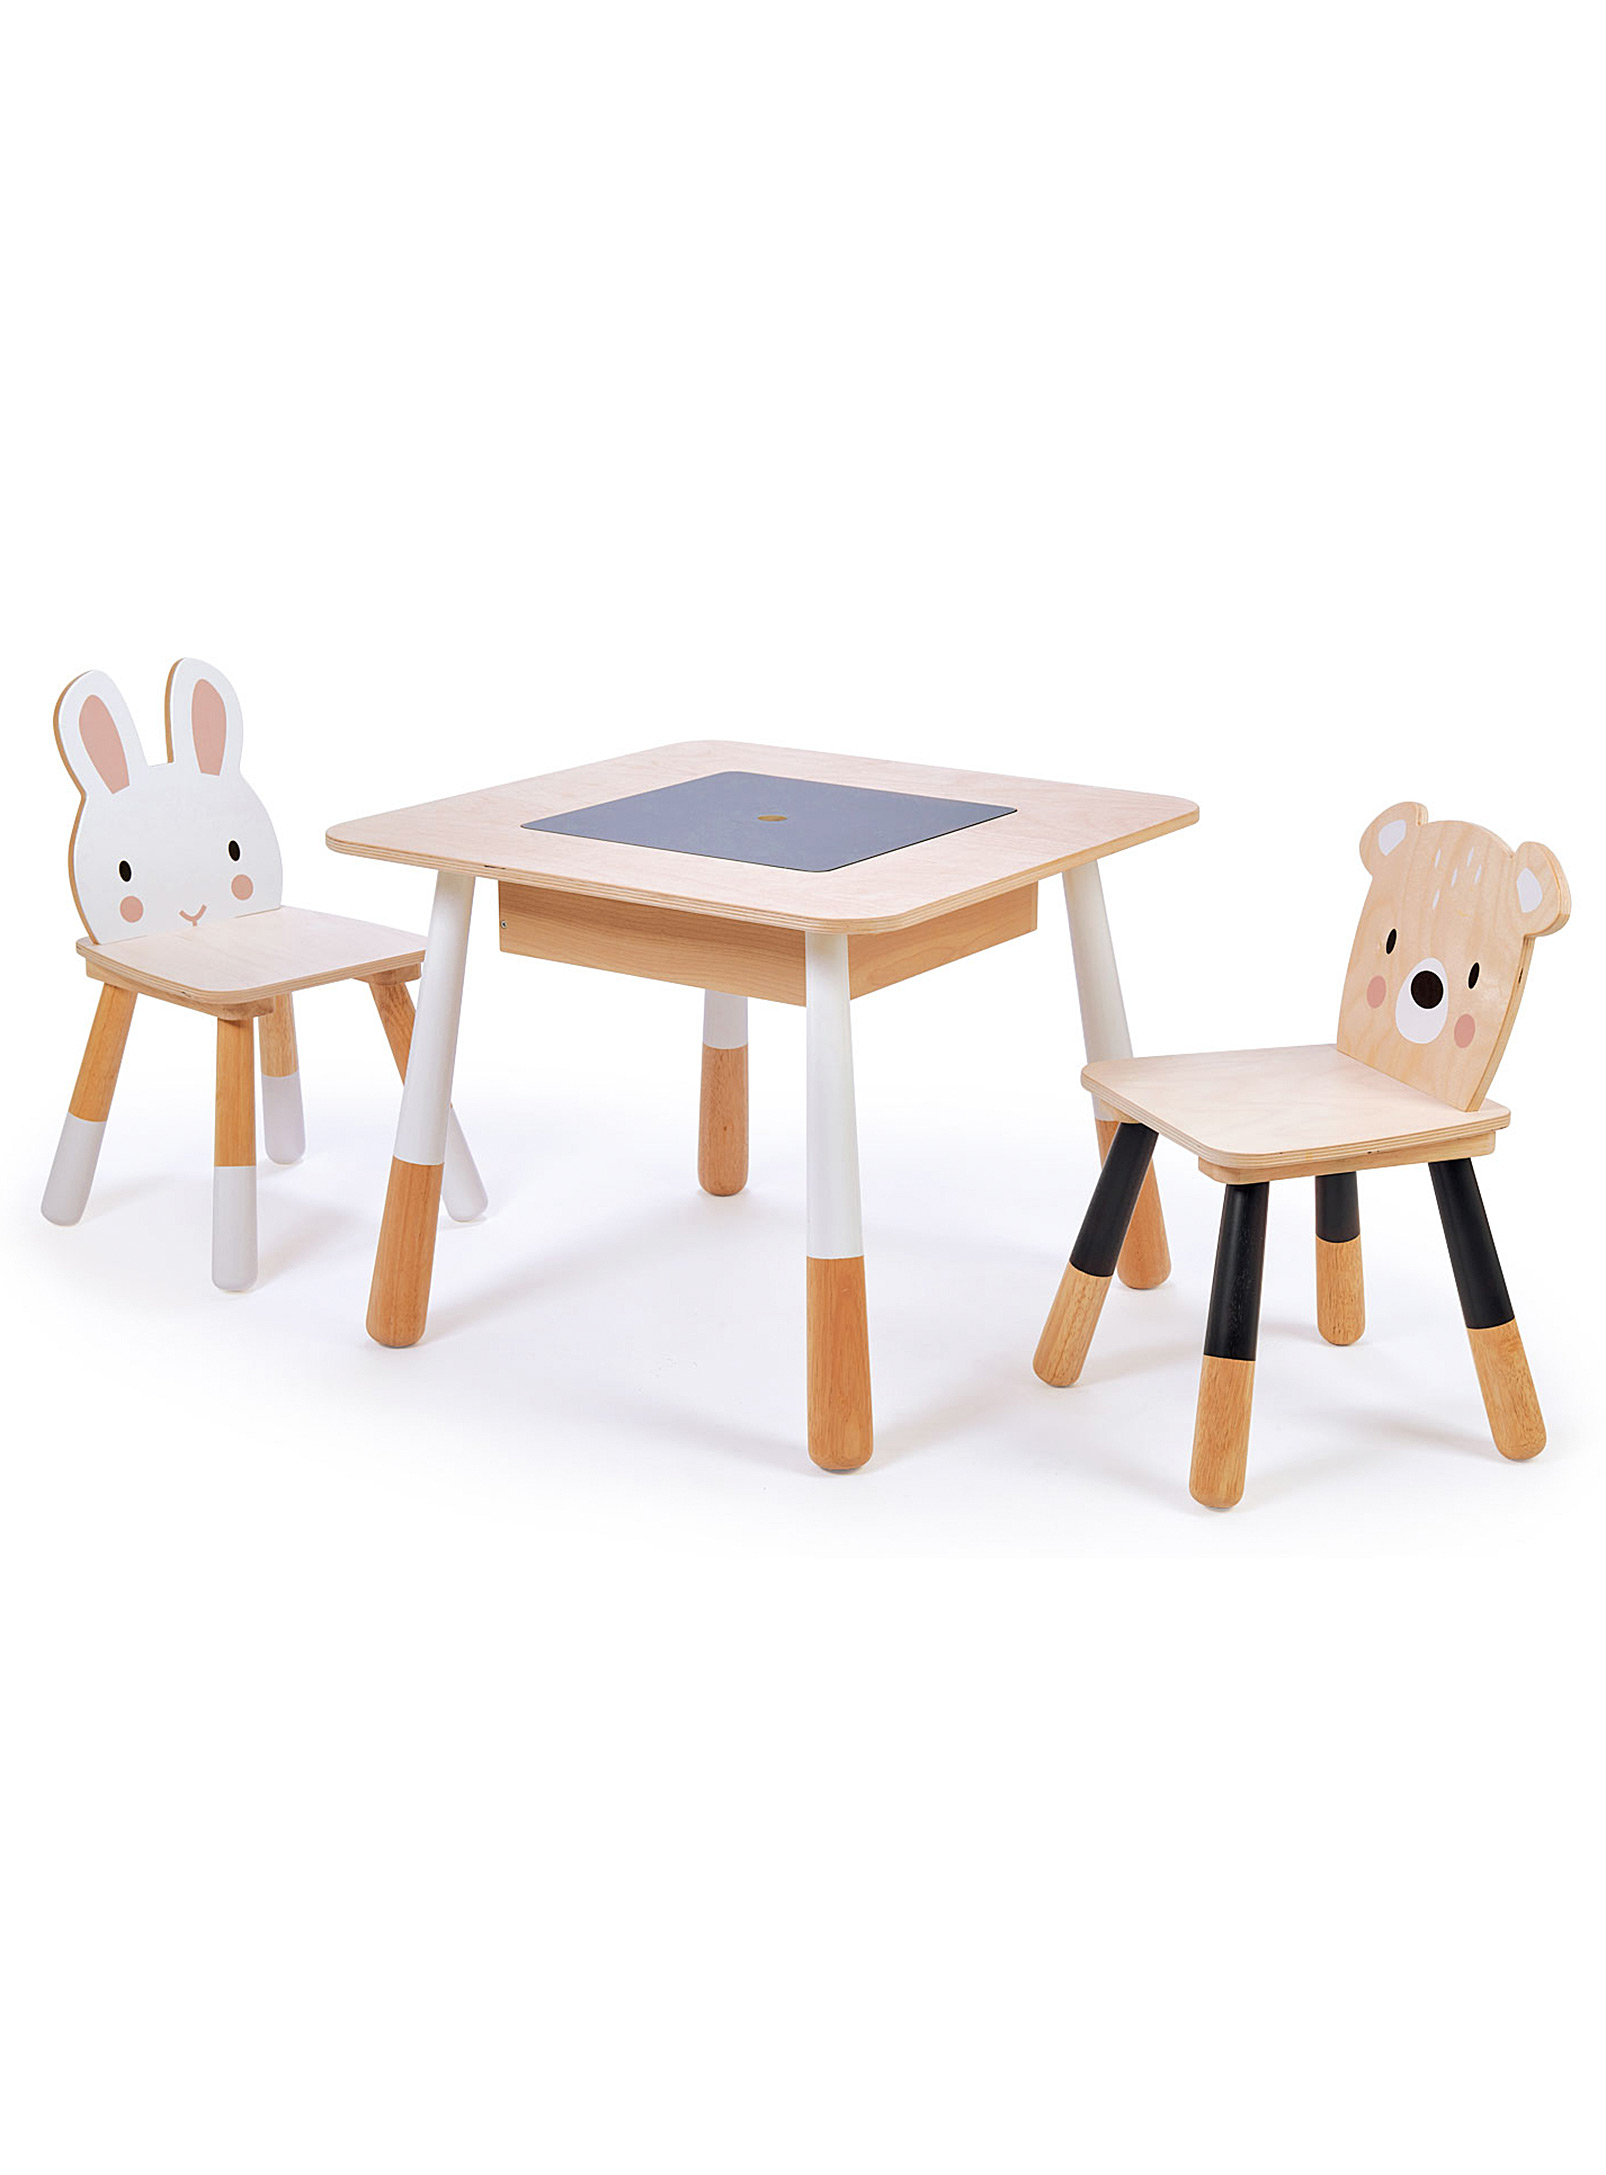 Tender Leaf Toys - Animal table and chairs 3-piece set